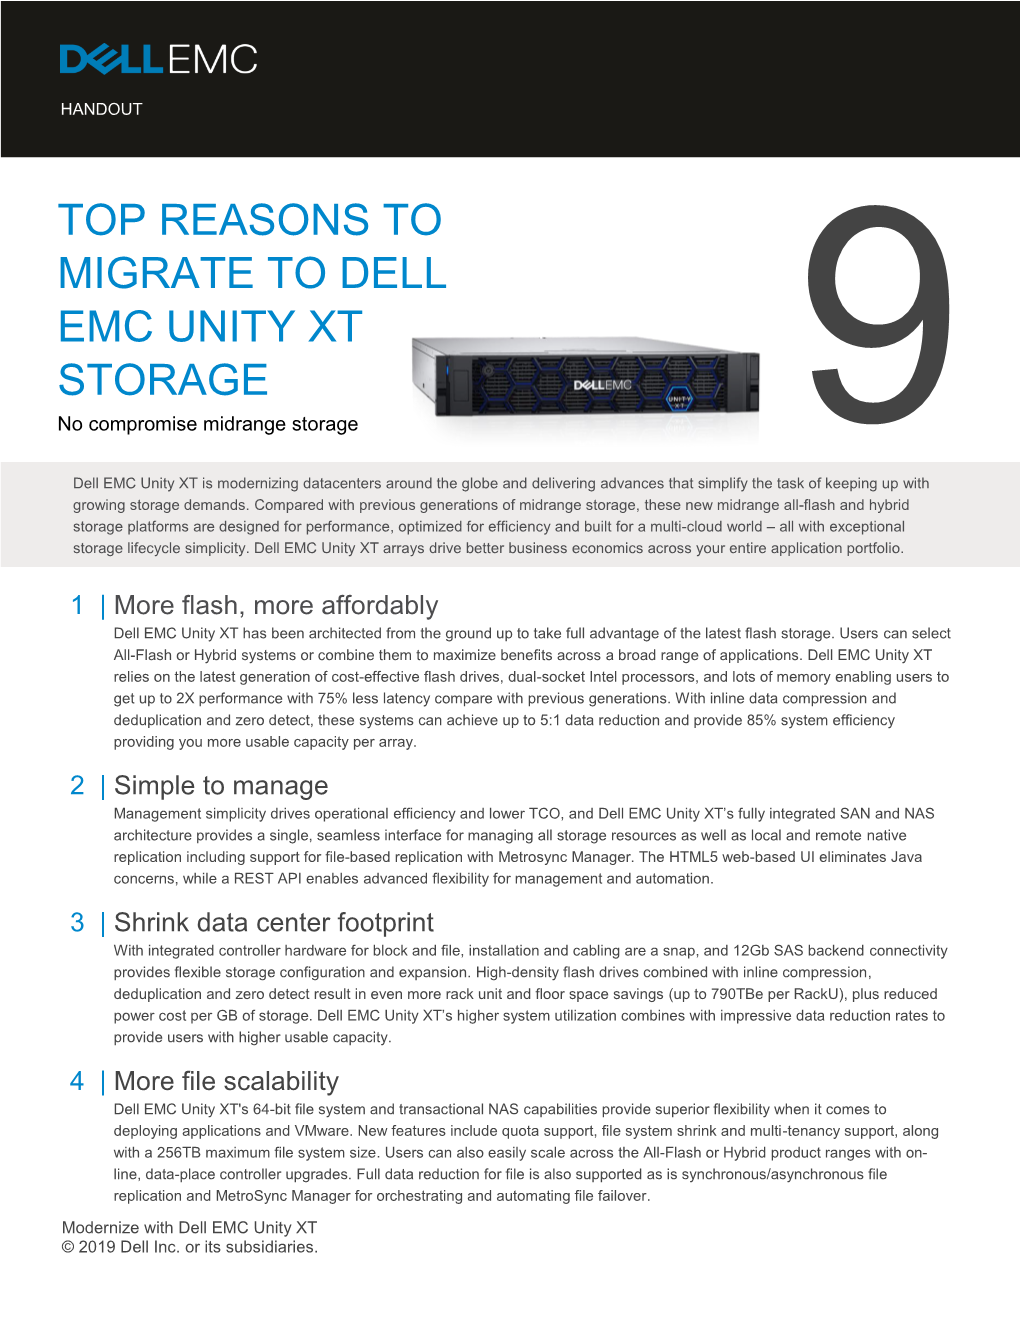 Top Reasons to Migrate to Dell Emc Unity Xt Storage